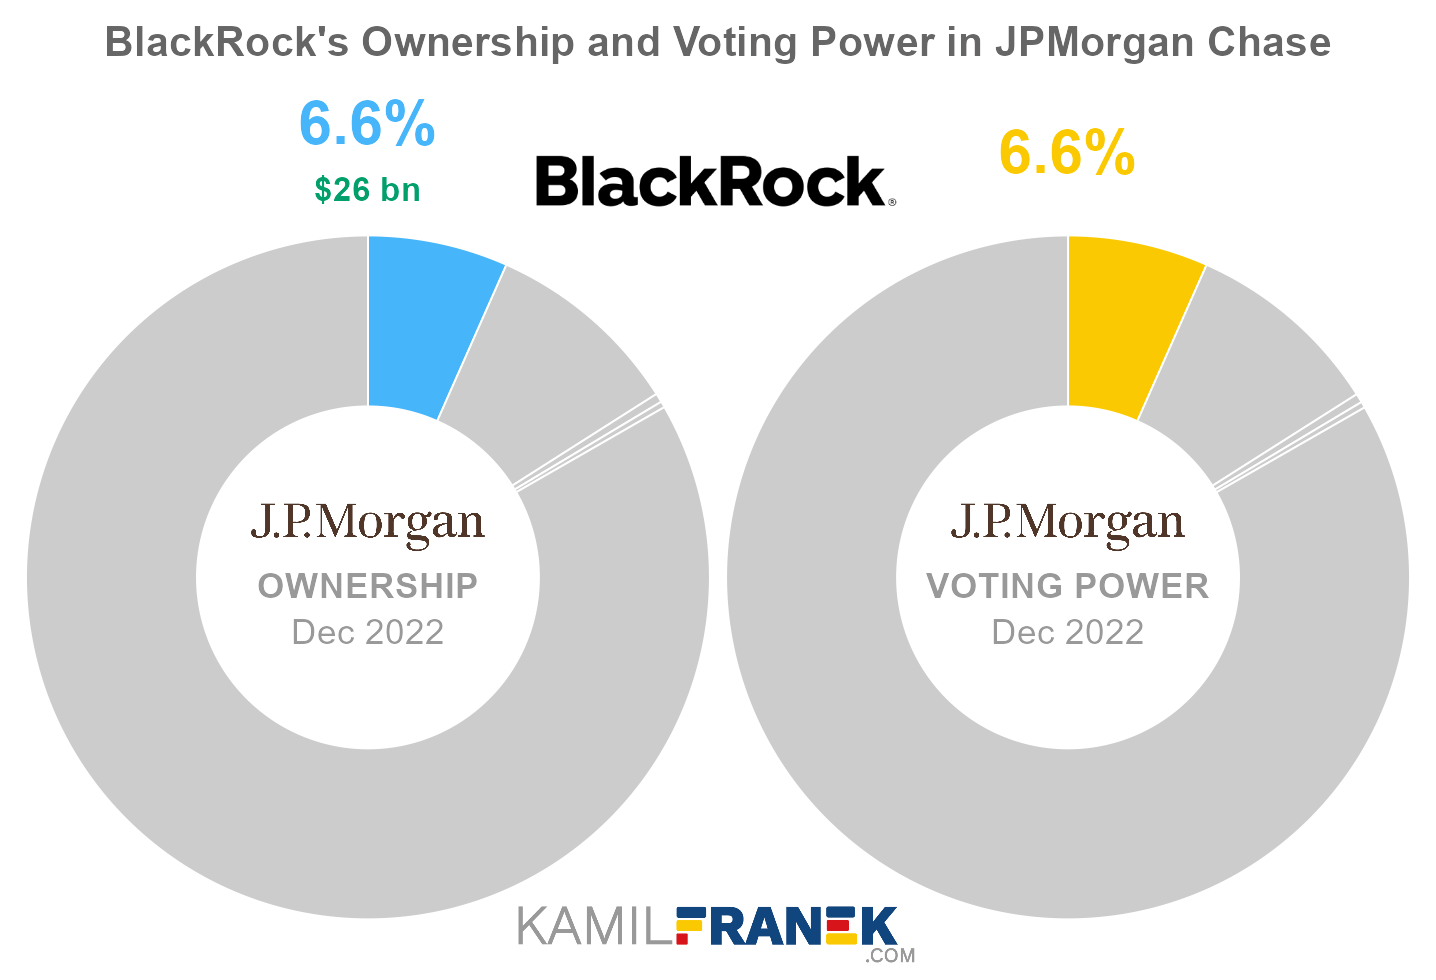 BlackRock's share ownership and voting power in JPMorgan Chase (chart)